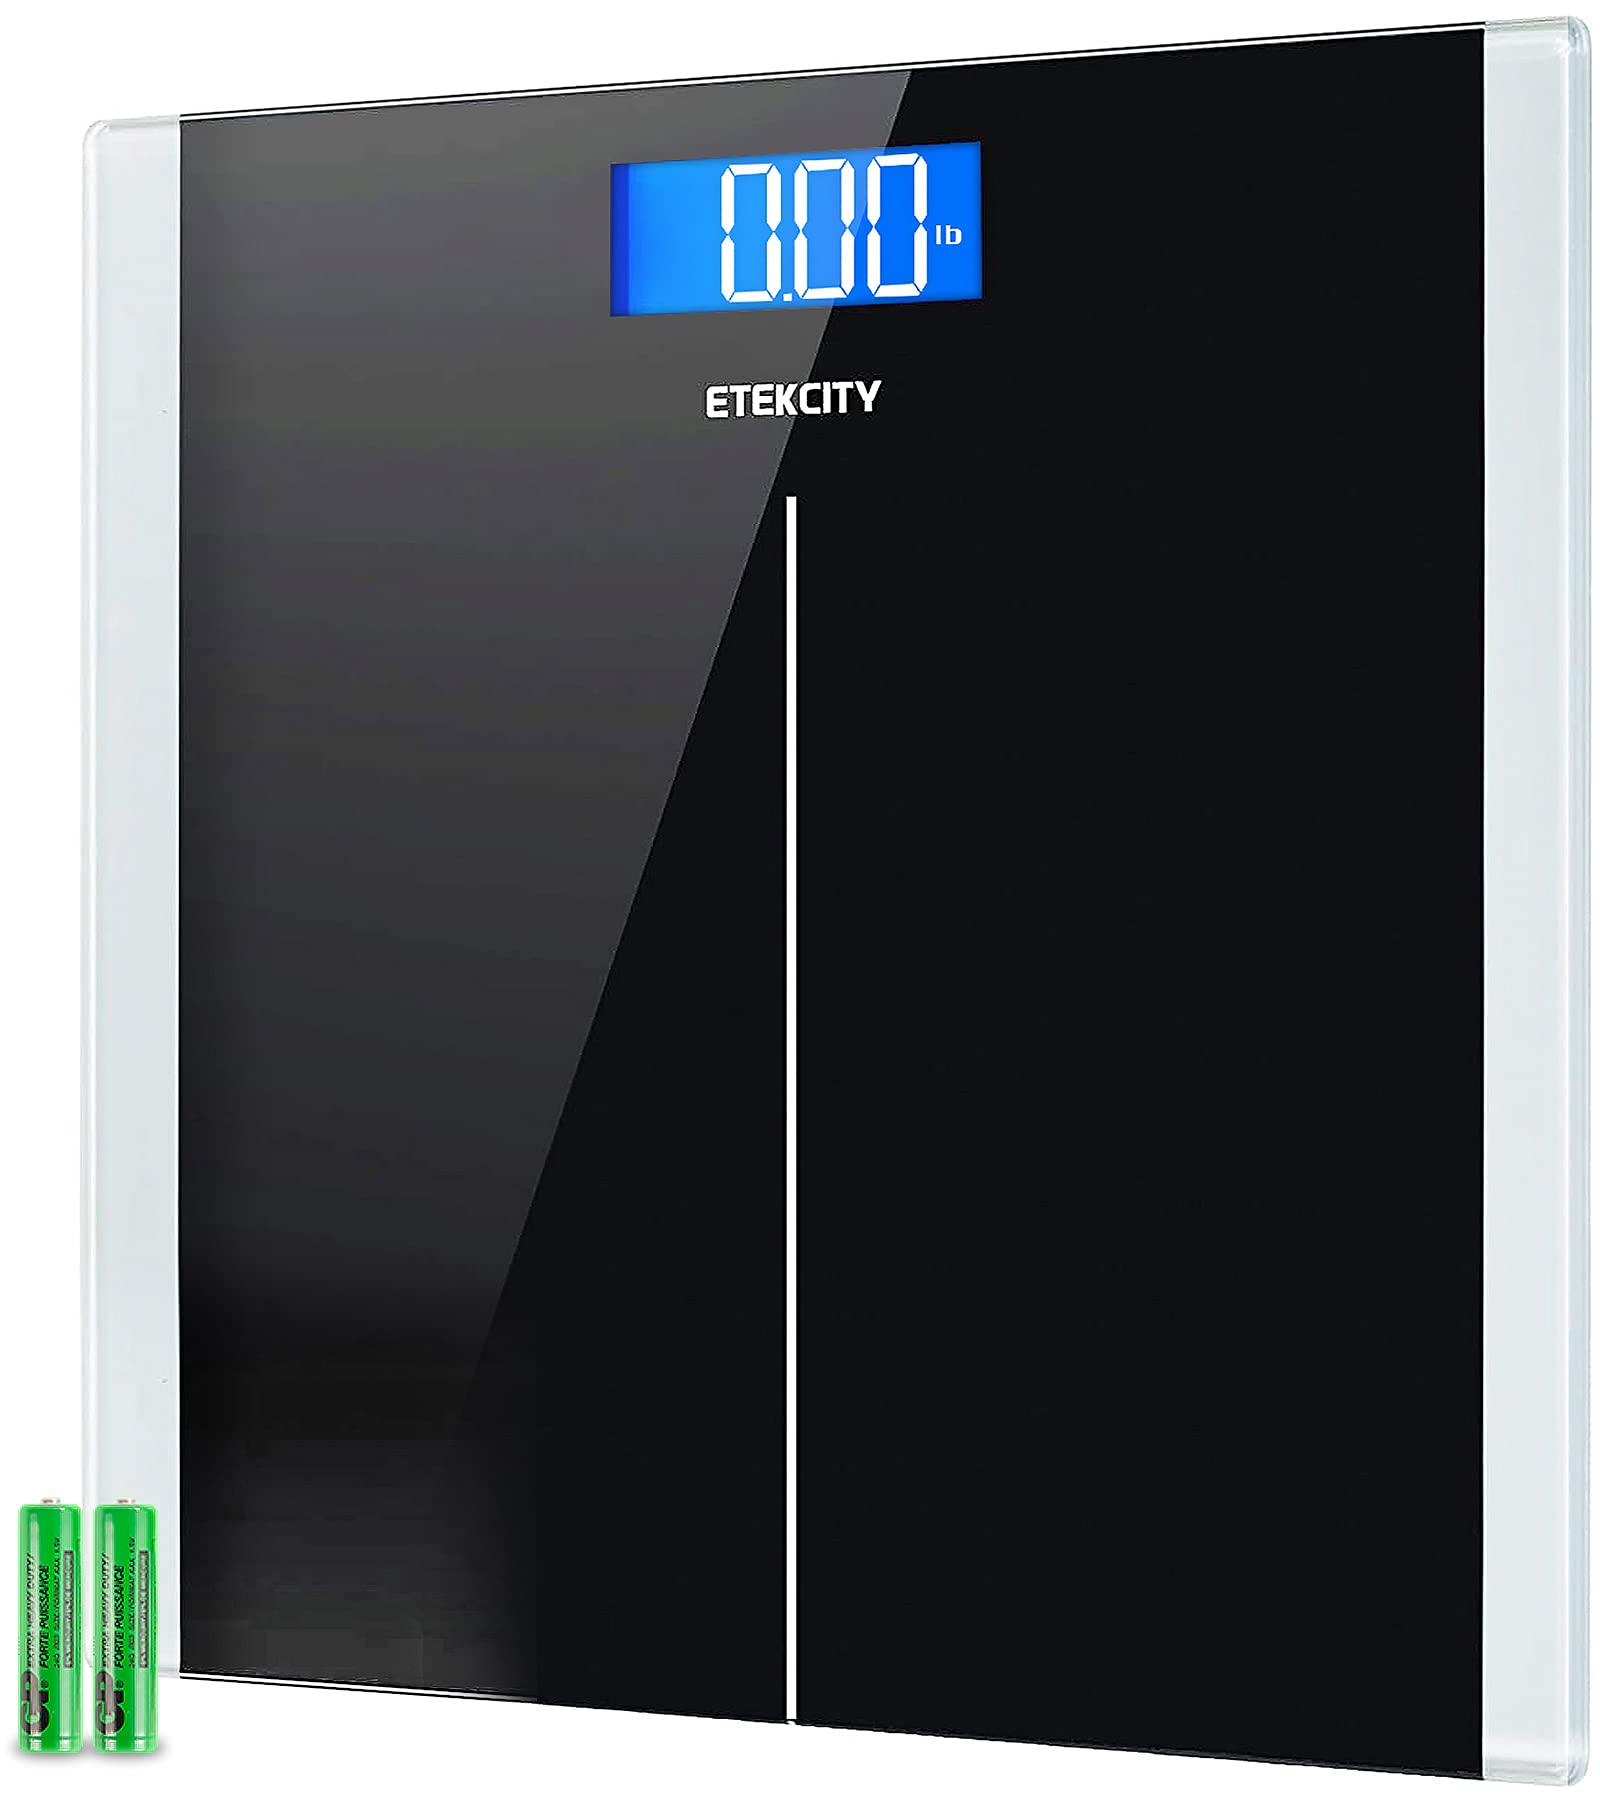 Etekcity 0.1g Food Scale, Bowl, Digital Grams and Ounces & Digital Body Weight Bathroom Scale with Step-On Technology, 400 Lb